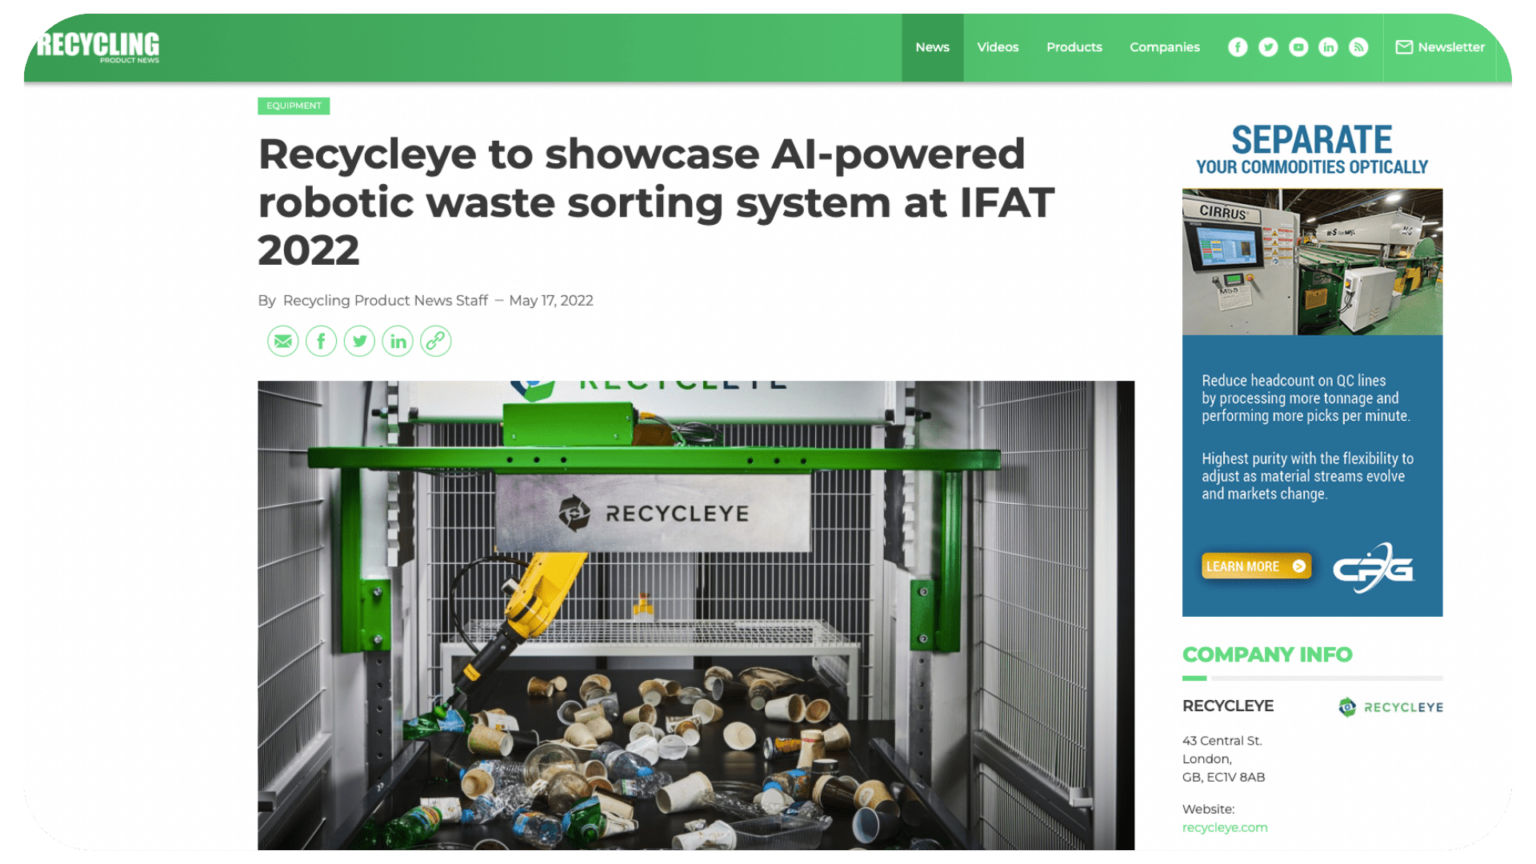 recycling product news article on Recycleye